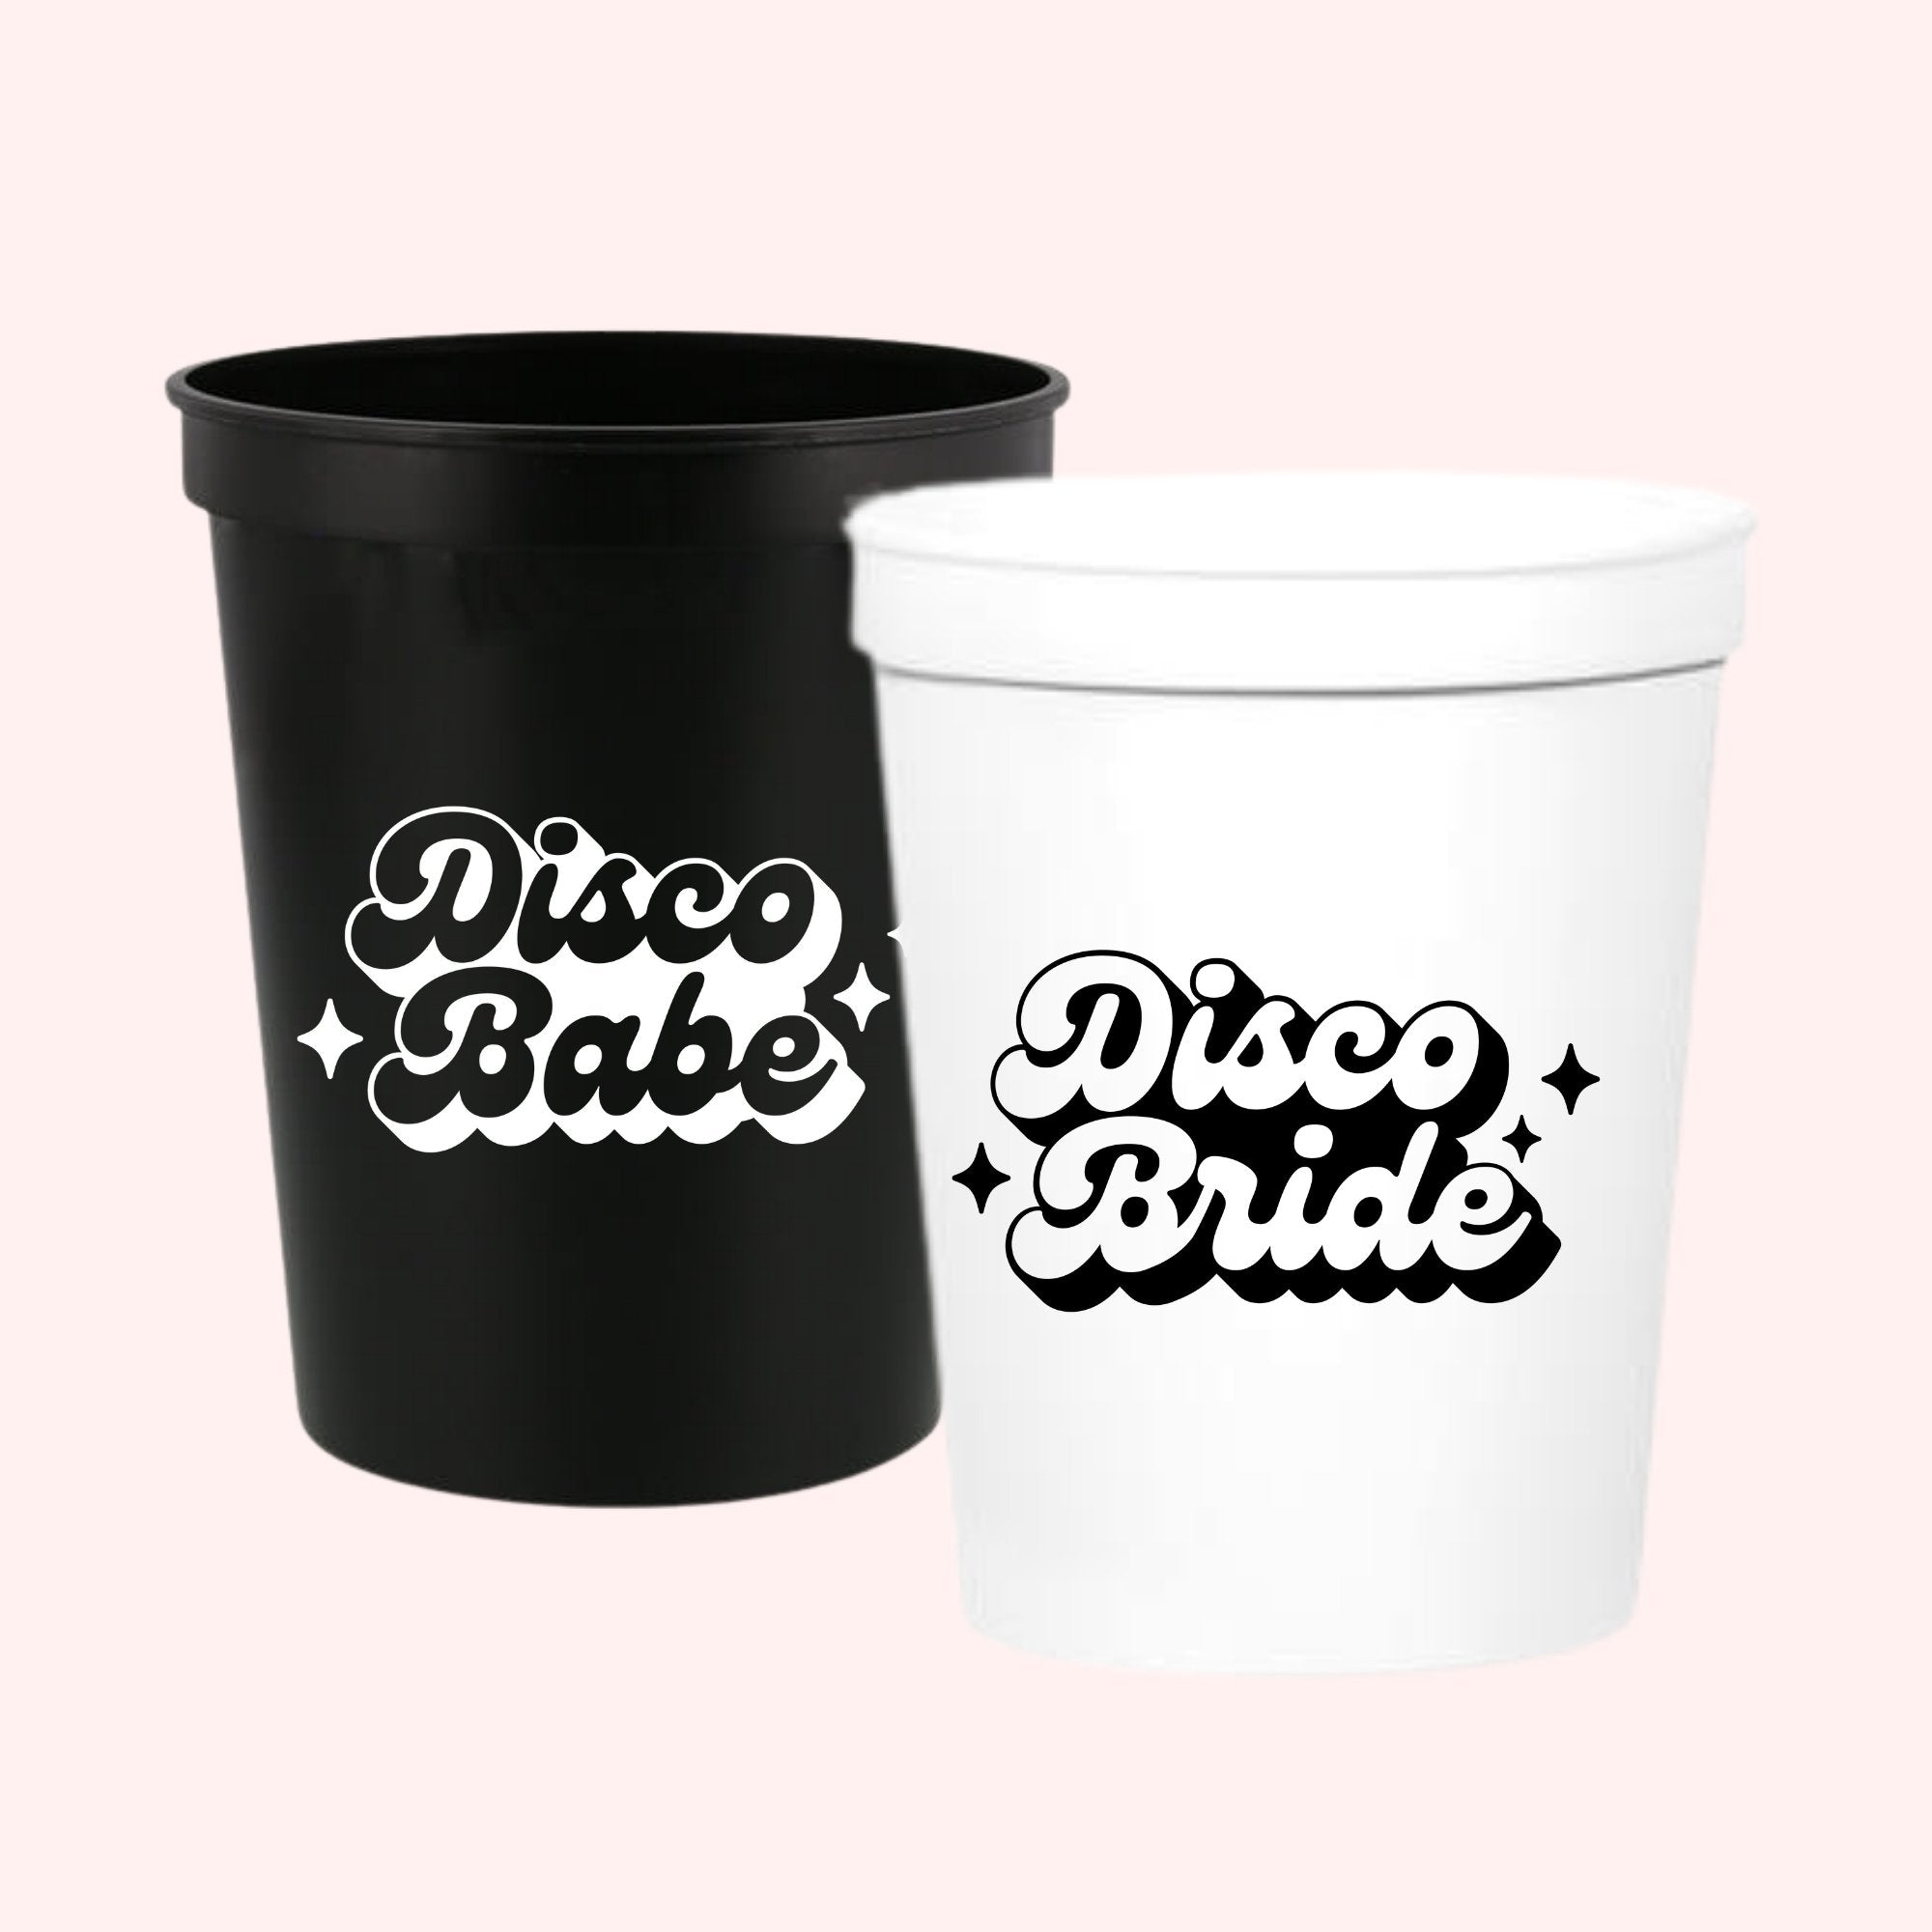 Black and white stadium cups that read "Disco Bride" and "Disco Babe"